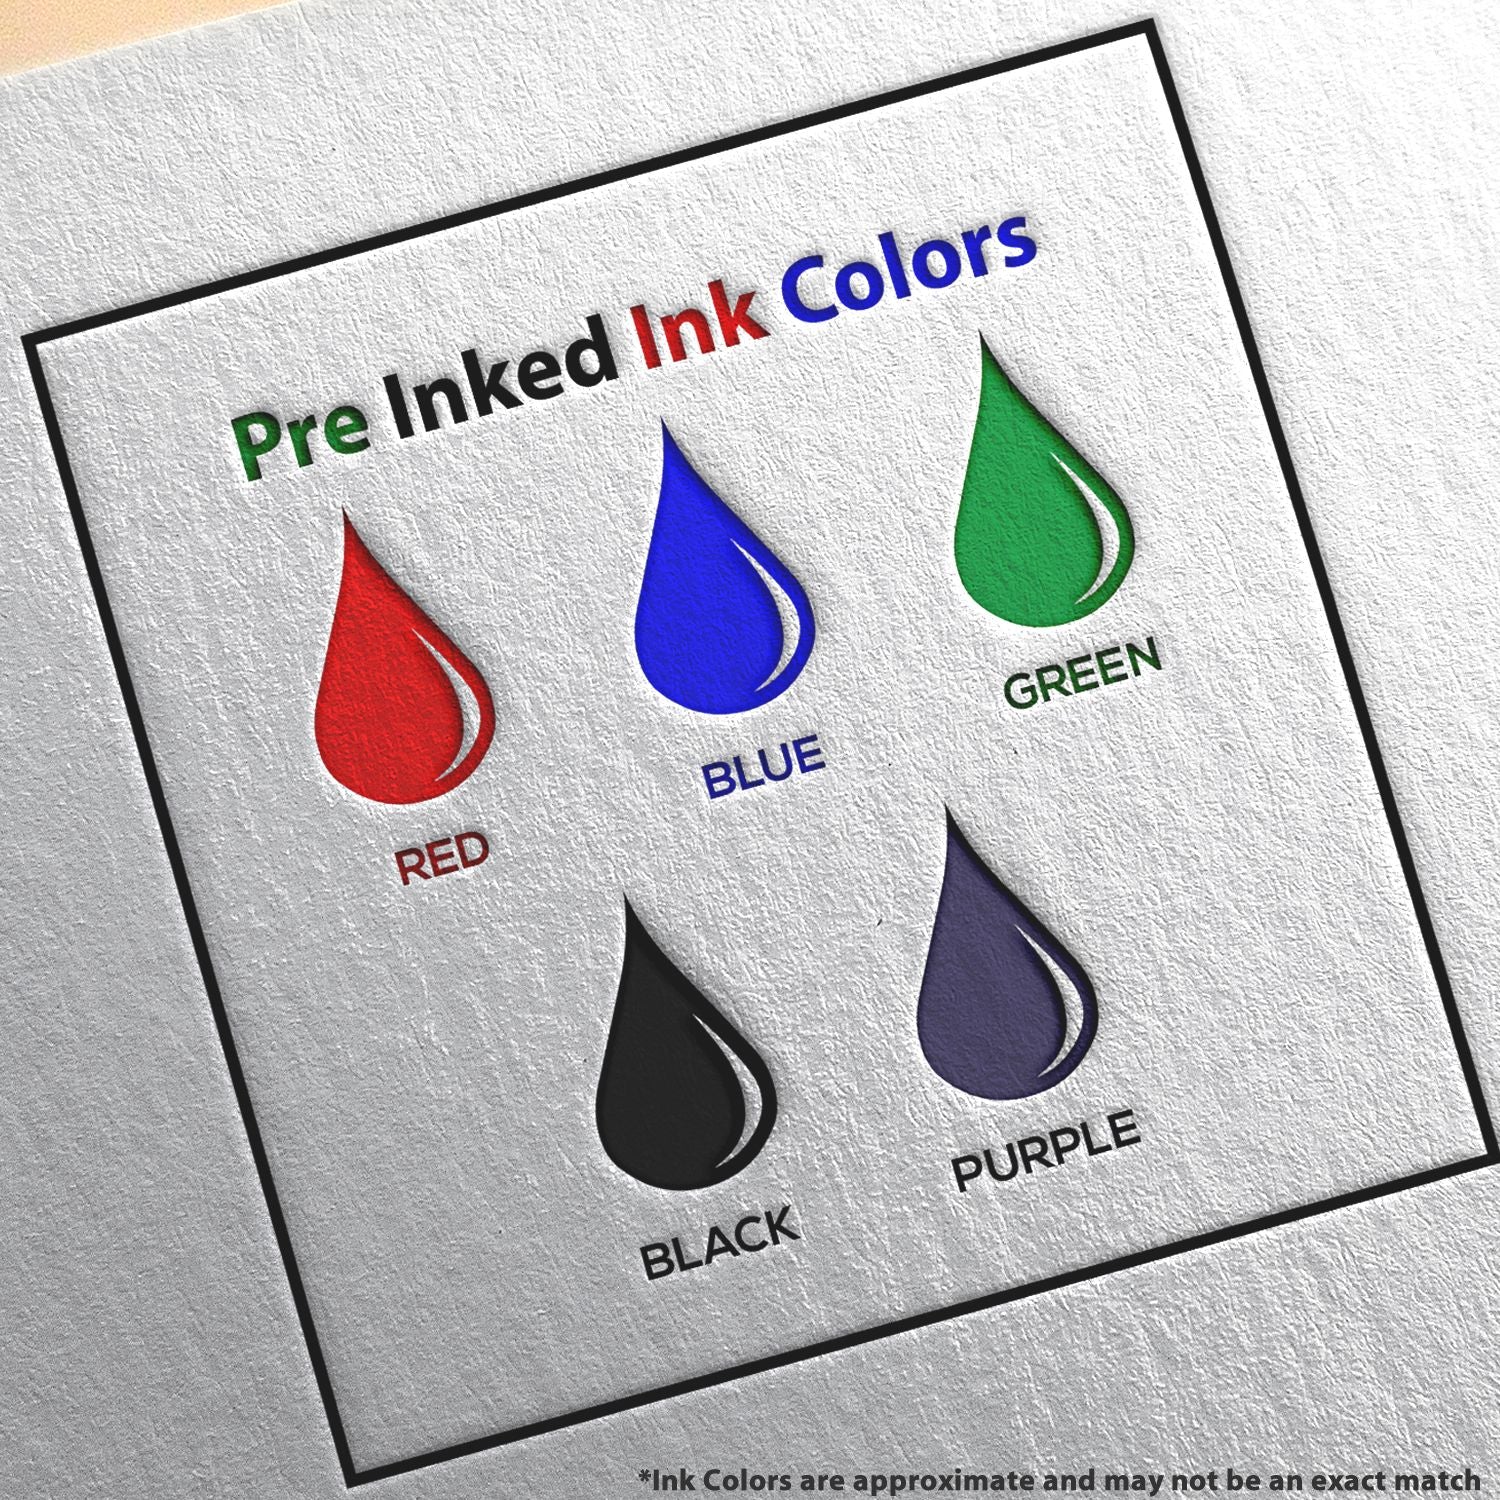 A picture showing the different ink colors or hues available for the Premium MaxLight Pre-Inked New Mexico Engineering Stamp product.